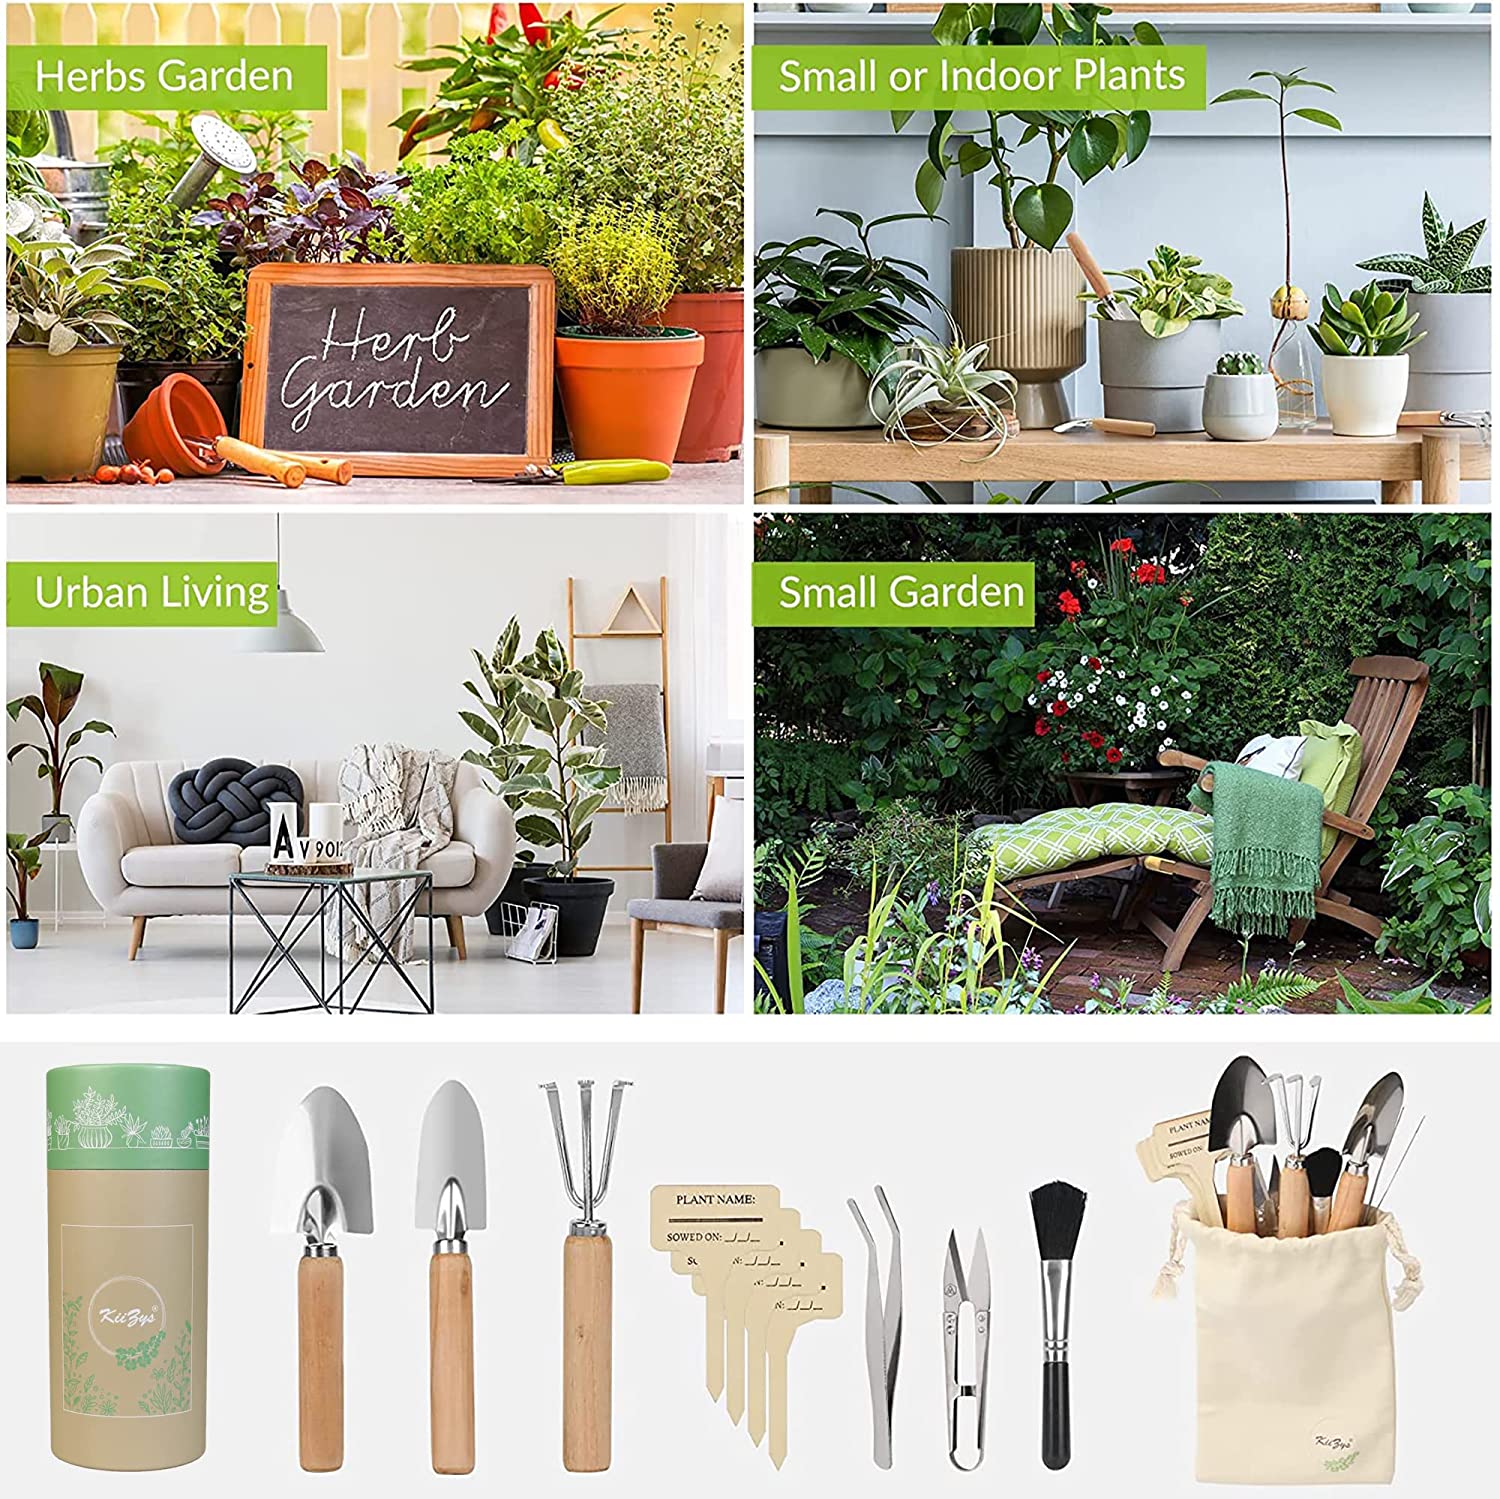 indoor herb garden gardening hand tools mothers day gifts for mom cylinder box grandparents mothers moms  hobbies for women spiritual gifts for women small tool kit mom gifts from daughters plant accessories indoor mini tool kit birthday gifts for grandma great grandma gifts house warming gift house plant accessories plant care fathers day gifts for dad mens teenagers teachers boss brother sister thanksgiving xmas christmas gifts prsents